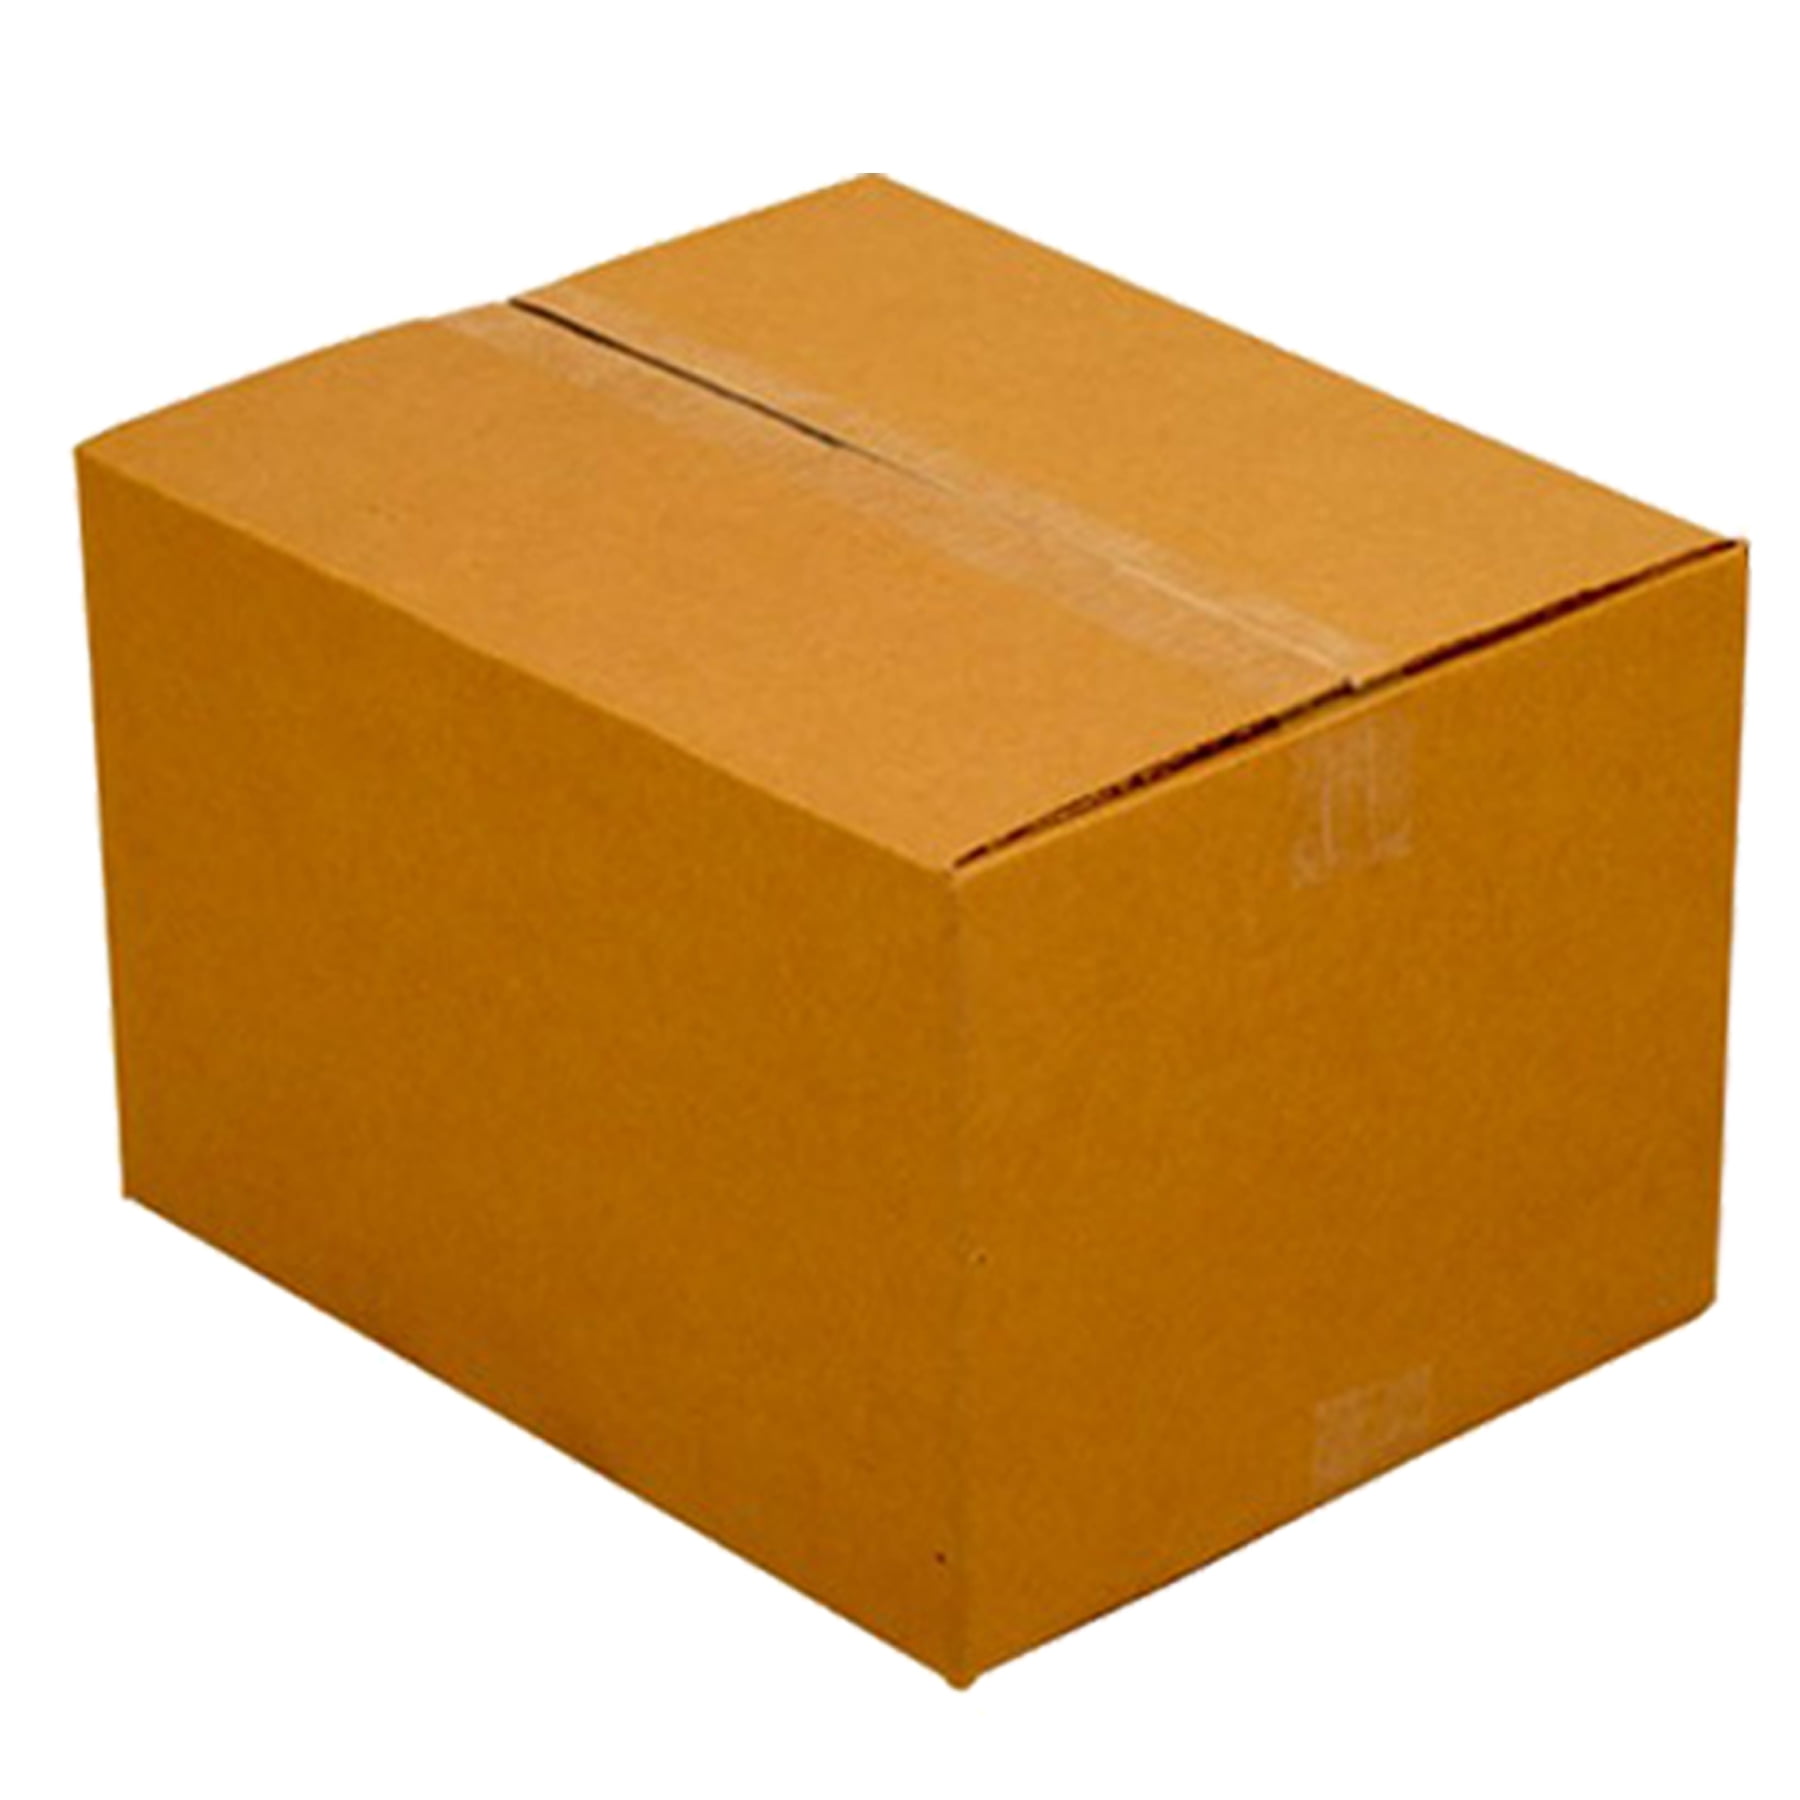 Photo 1 of uBoxes Medium Cardboard Moving Boxes (20 Pack) 18 x 14 x 12-Inch